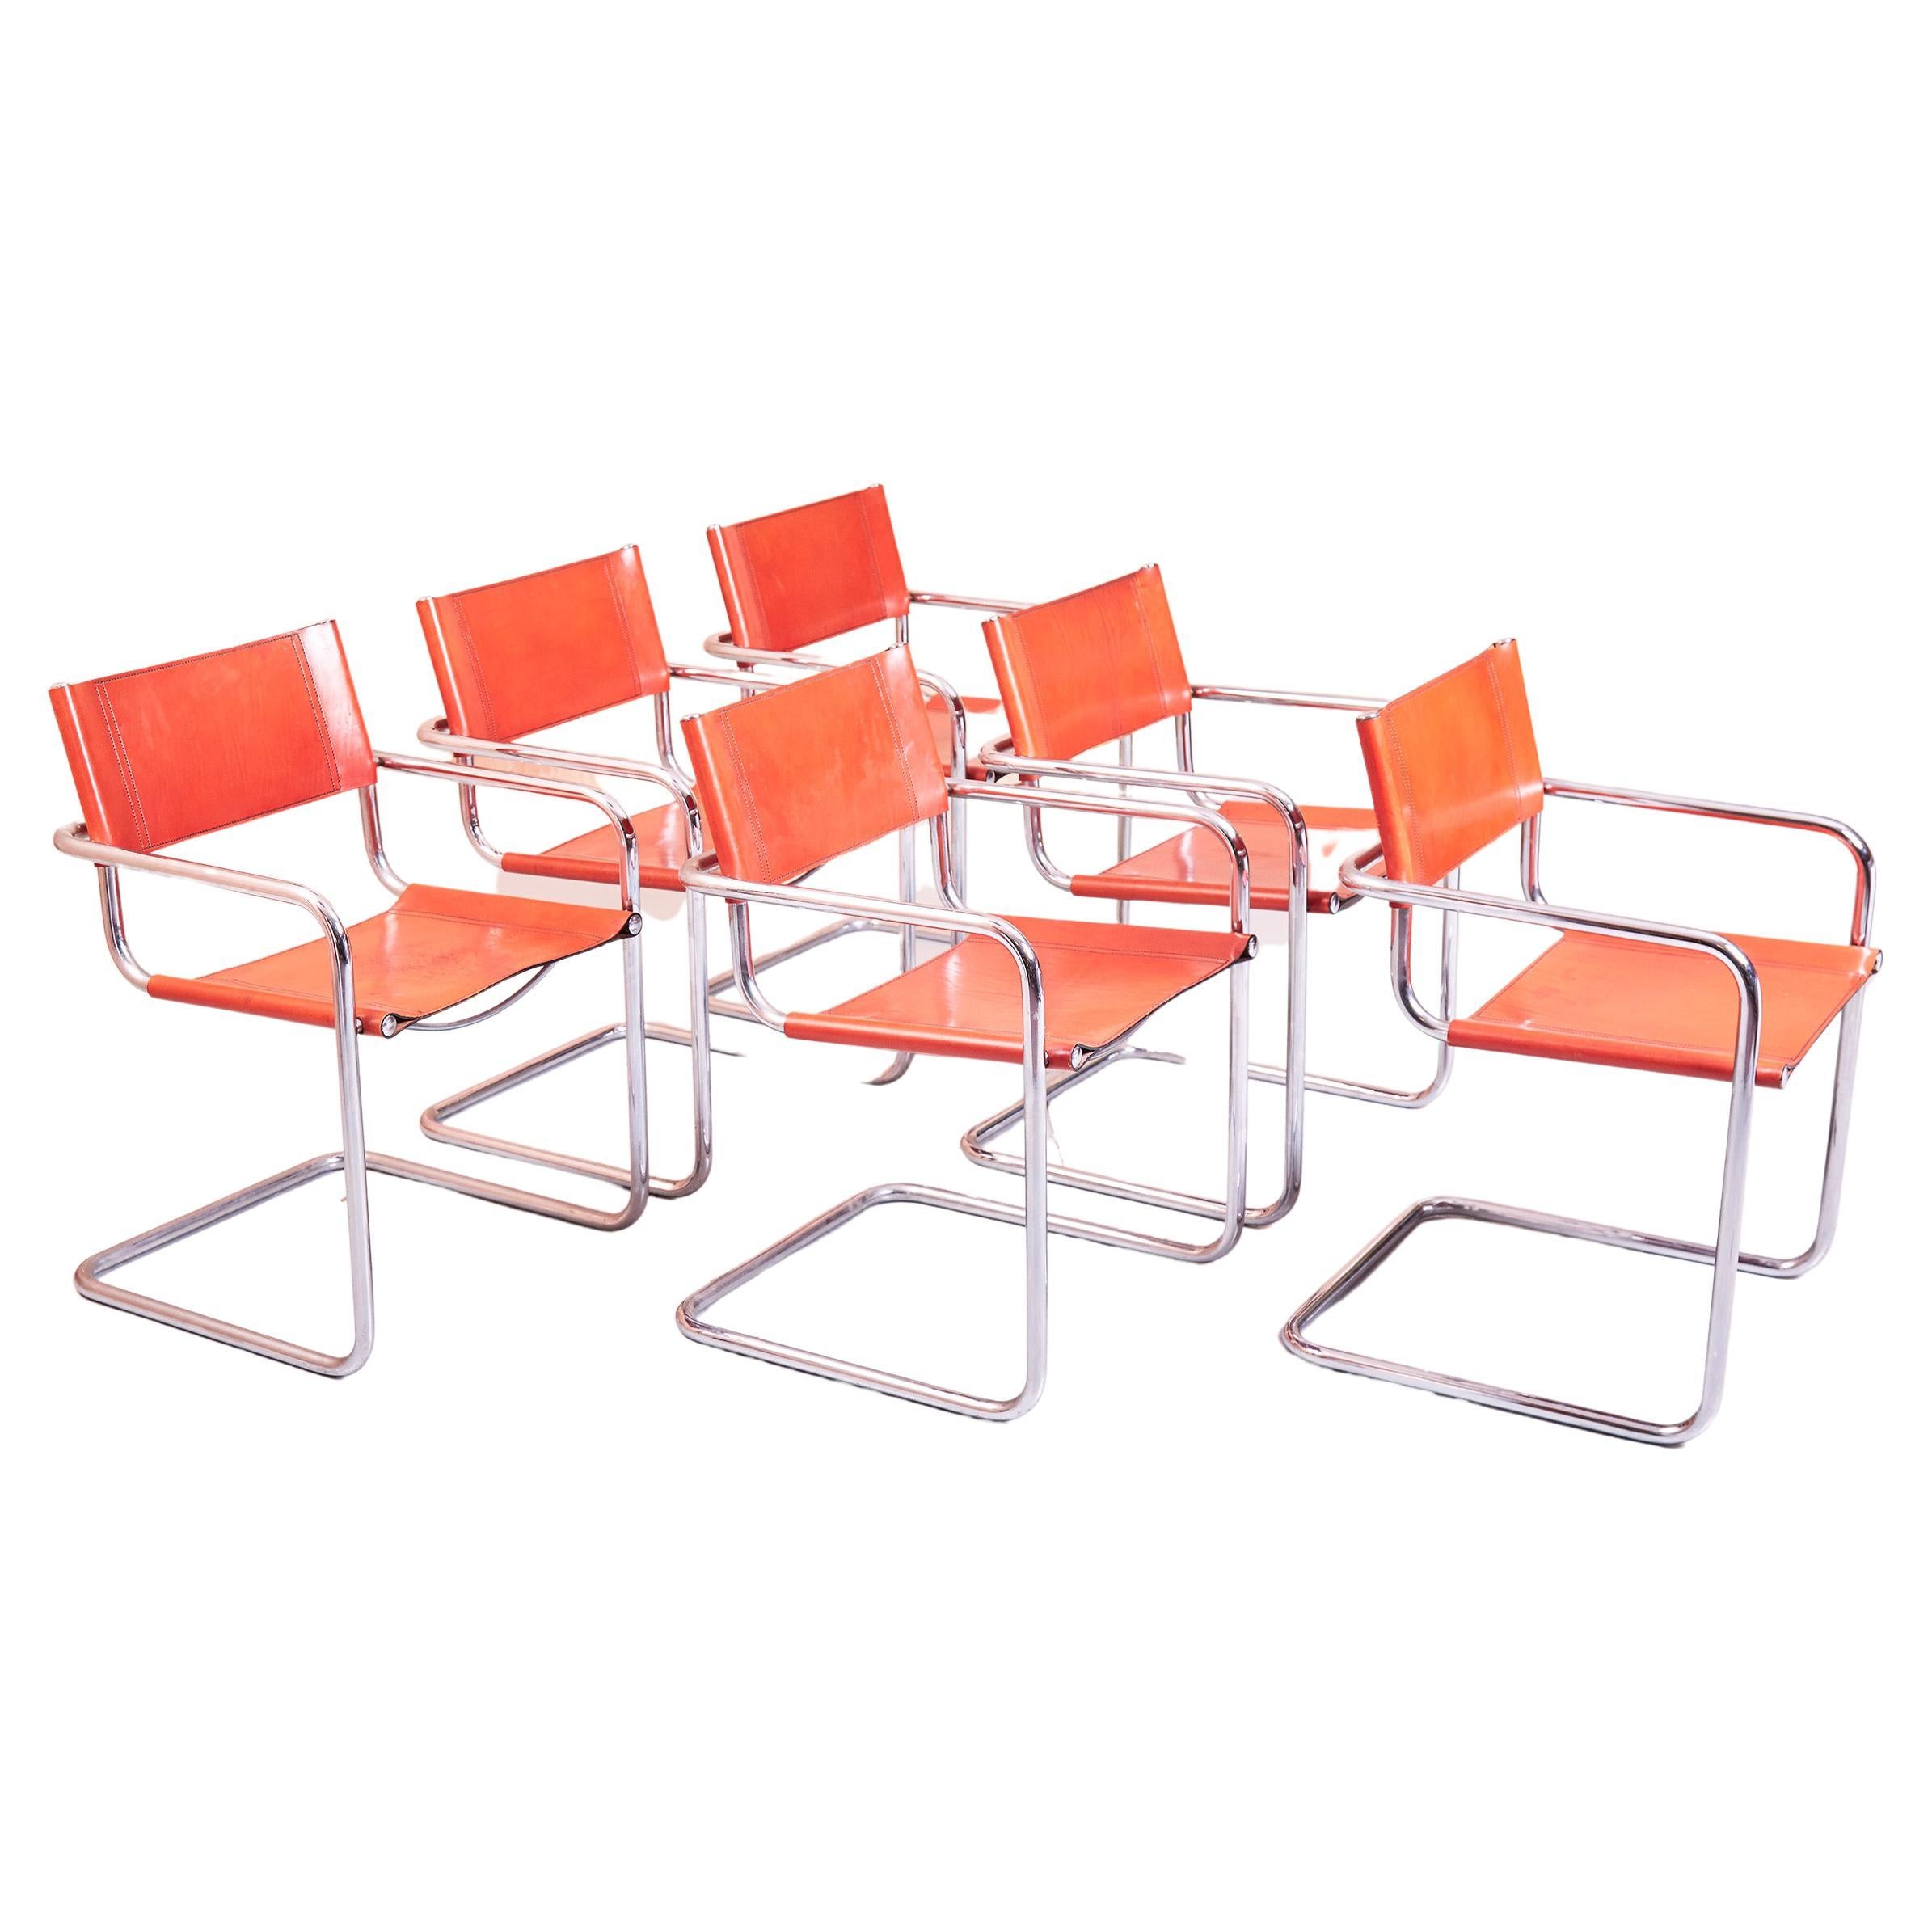 Set of Six Tubular Chrome and Cognac Leather Cantilever Chairs MG5 / S34 Style